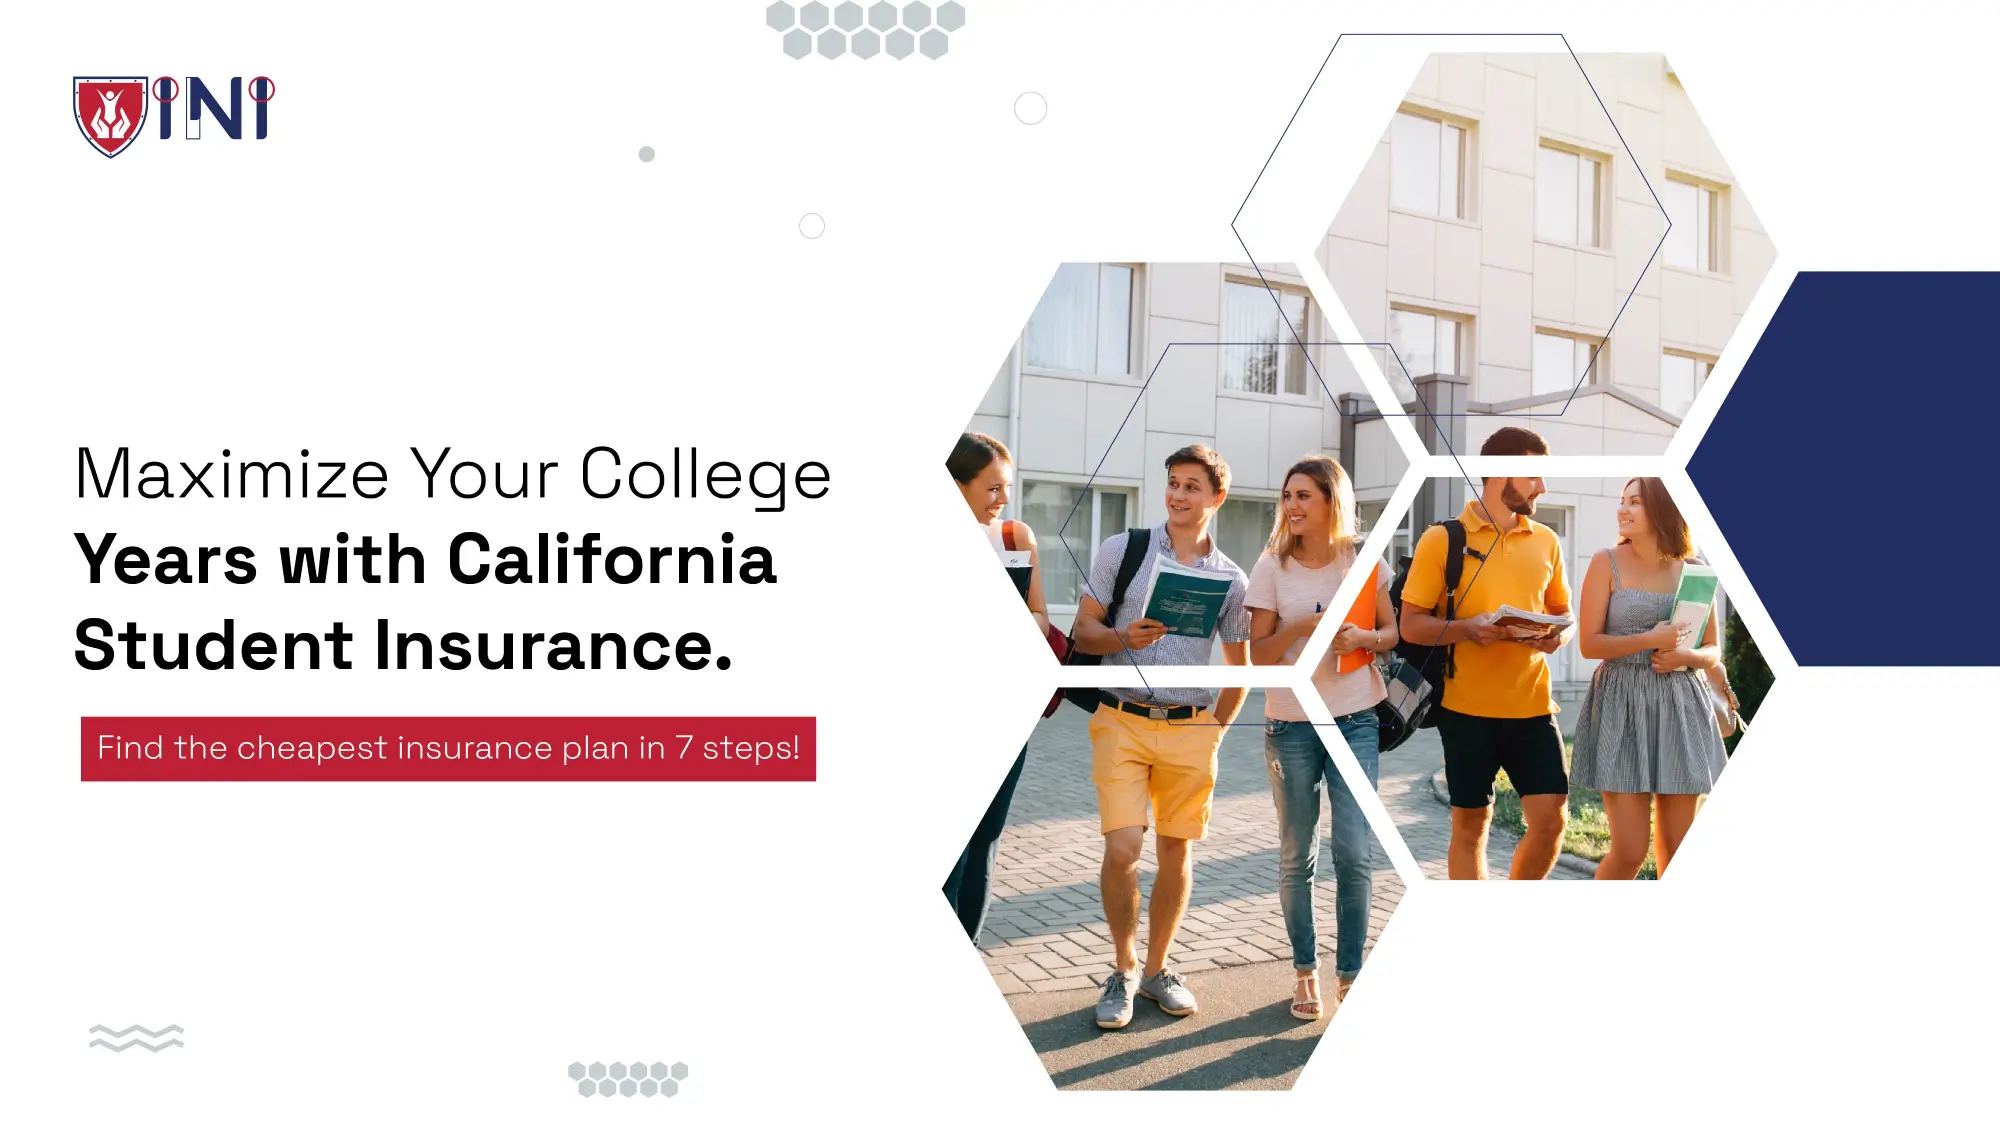 Maximize Your College Years with California Student Insurance.